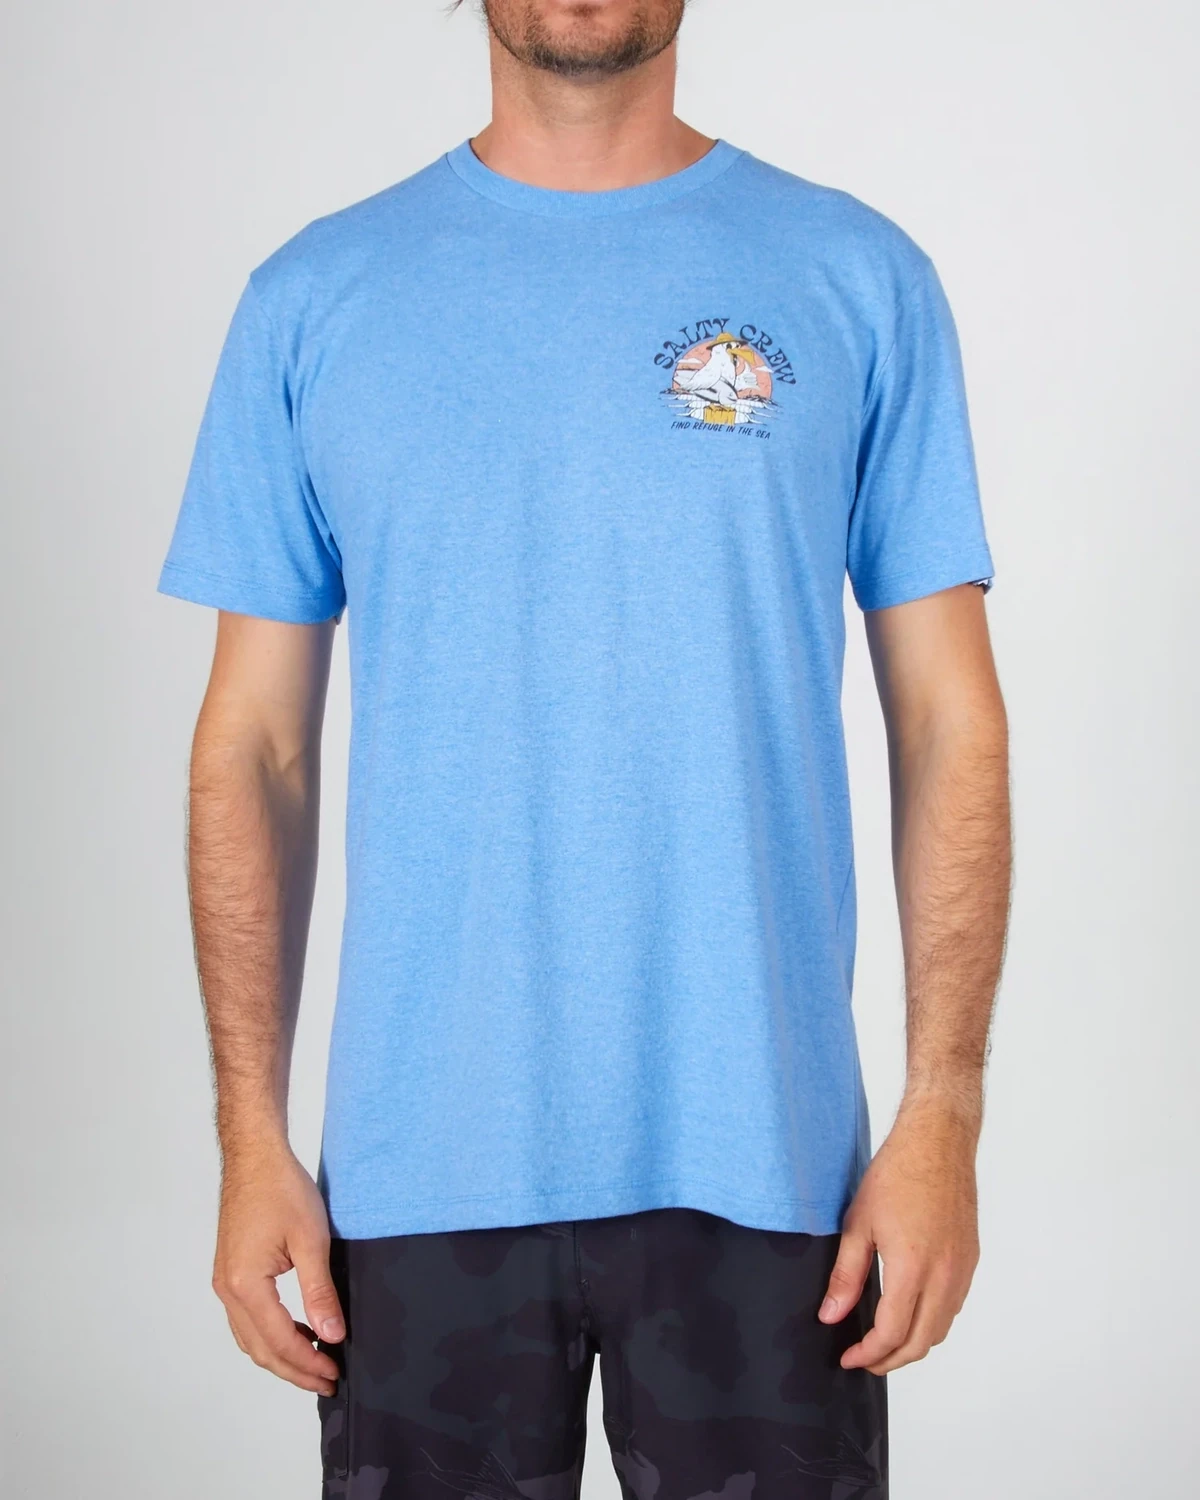 Salty Crew Gone Fishing SS/Tee Blue, Size: Sml